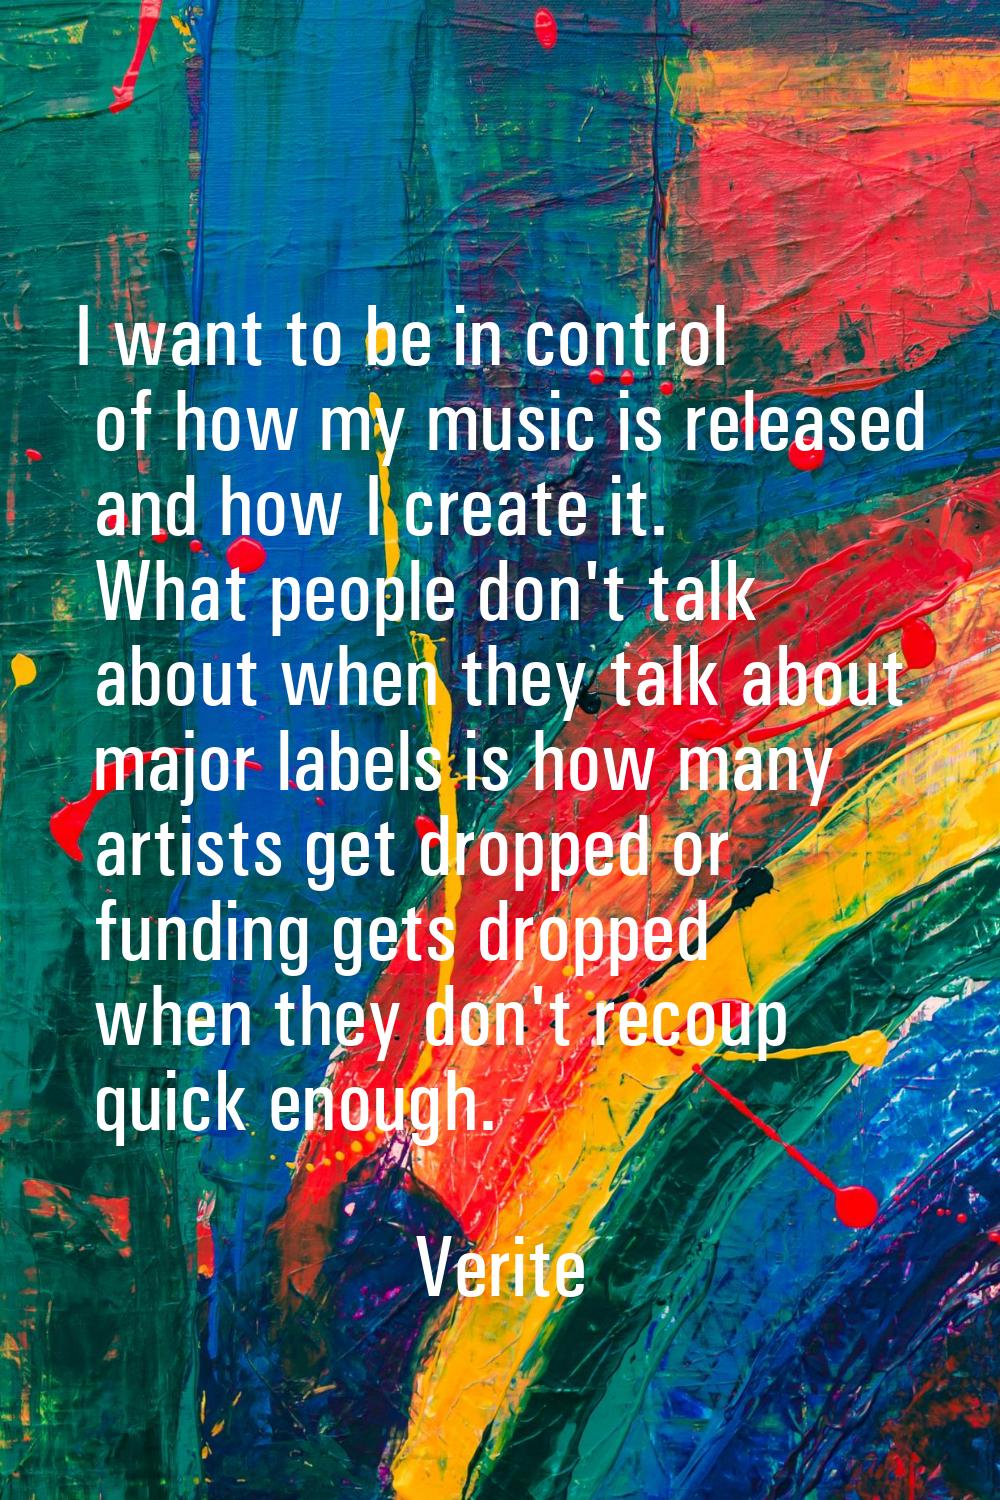 I want to be in control of how my music is released and how I create it. What people don't talk abo